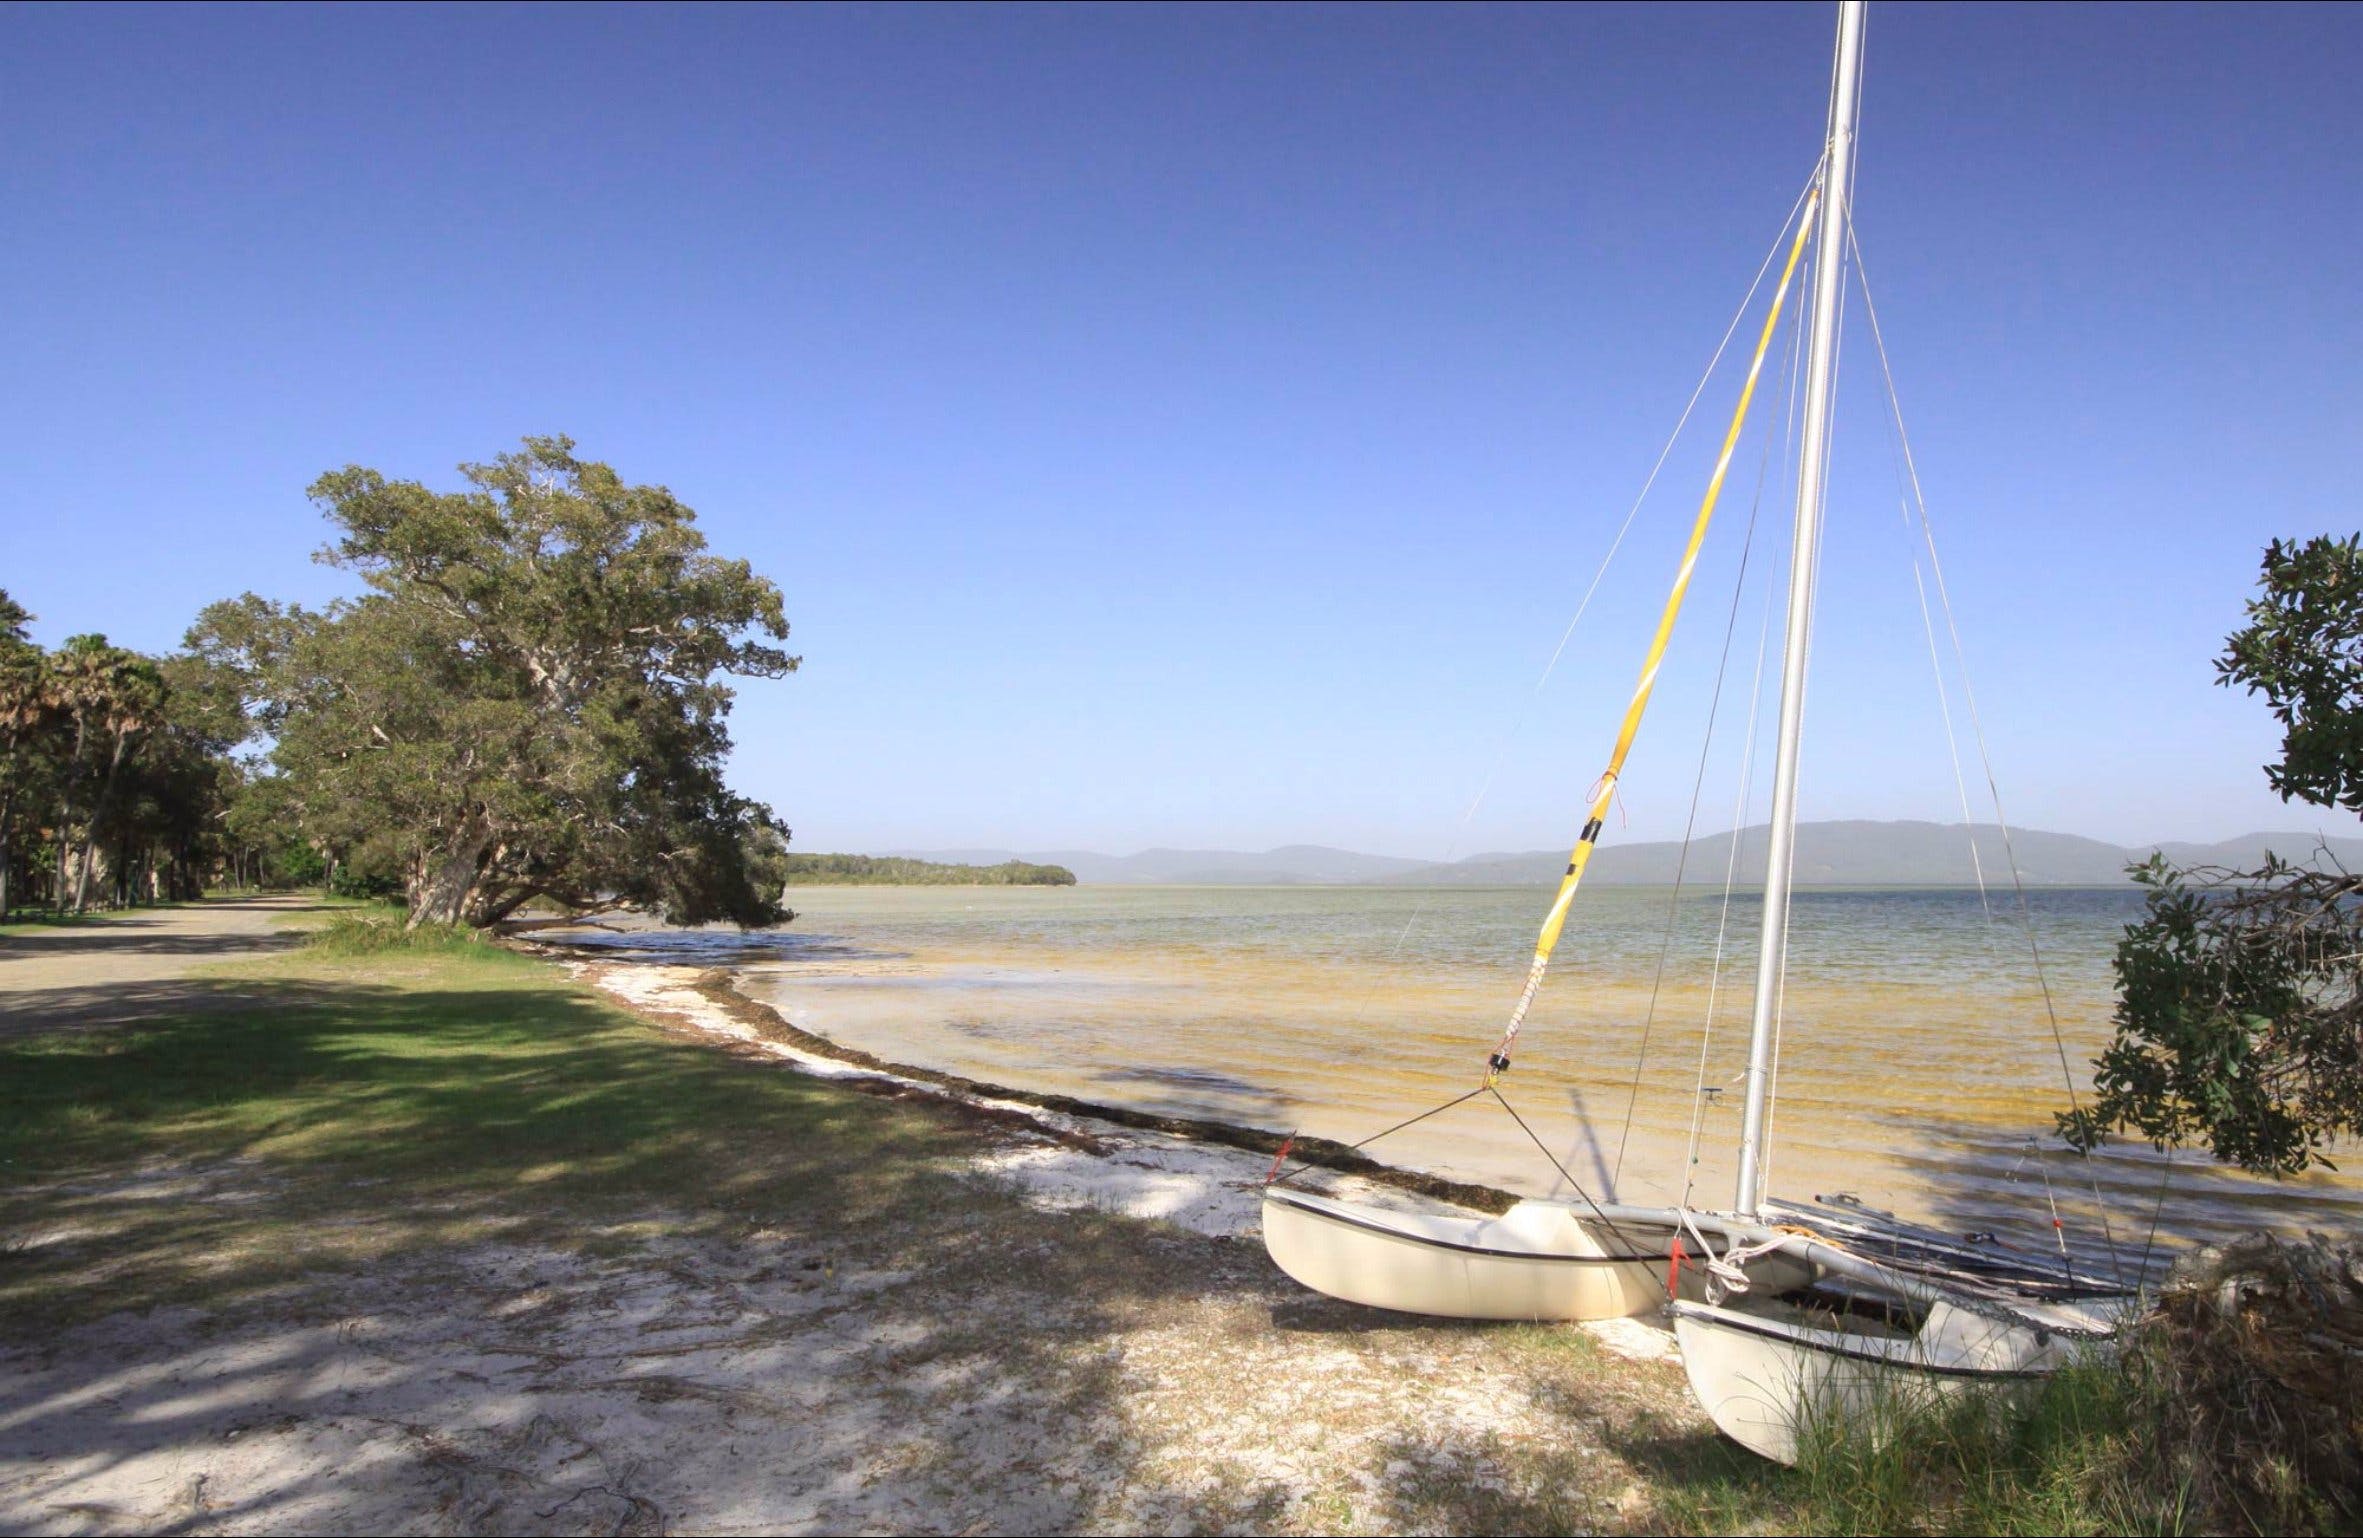 Sailing Club picnic area - Accommodation Airlie Beach